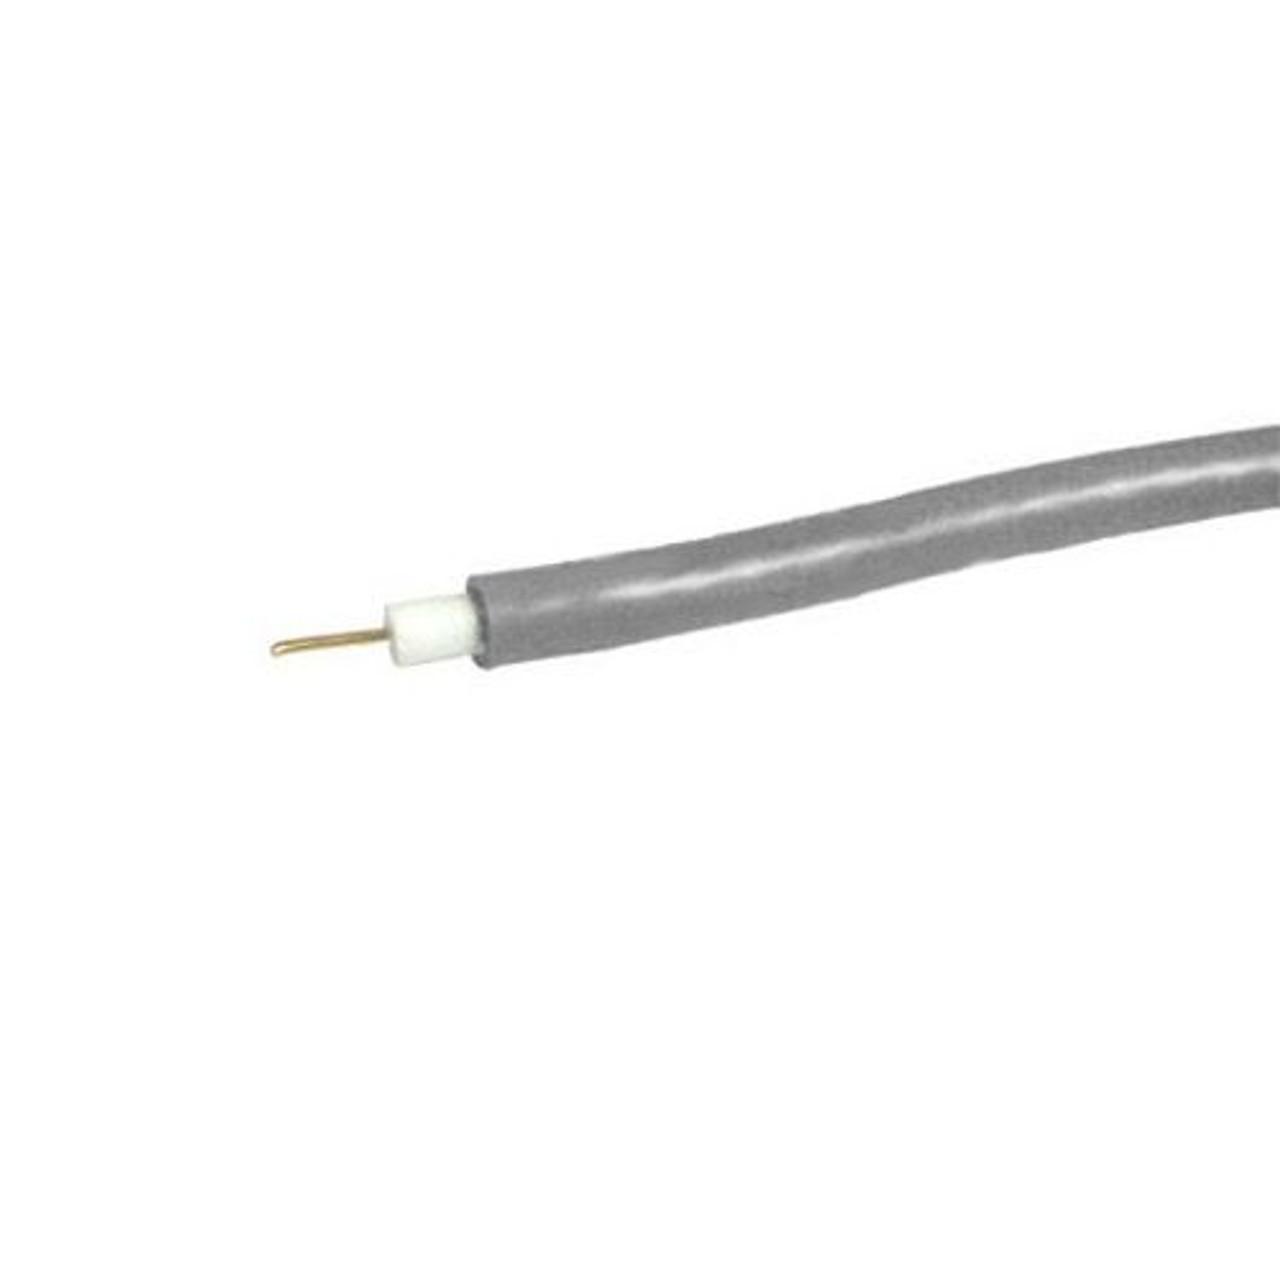 Eagle 31A2R 1000' FT RG6 Coaxial Cable 3 GHz Pro Grade Gray CCS 18 AWG 60% Shield RG-6 Pull Box Foot Marked UL Listed Antenna Satellite TV Digital HDTV Signal Line TV